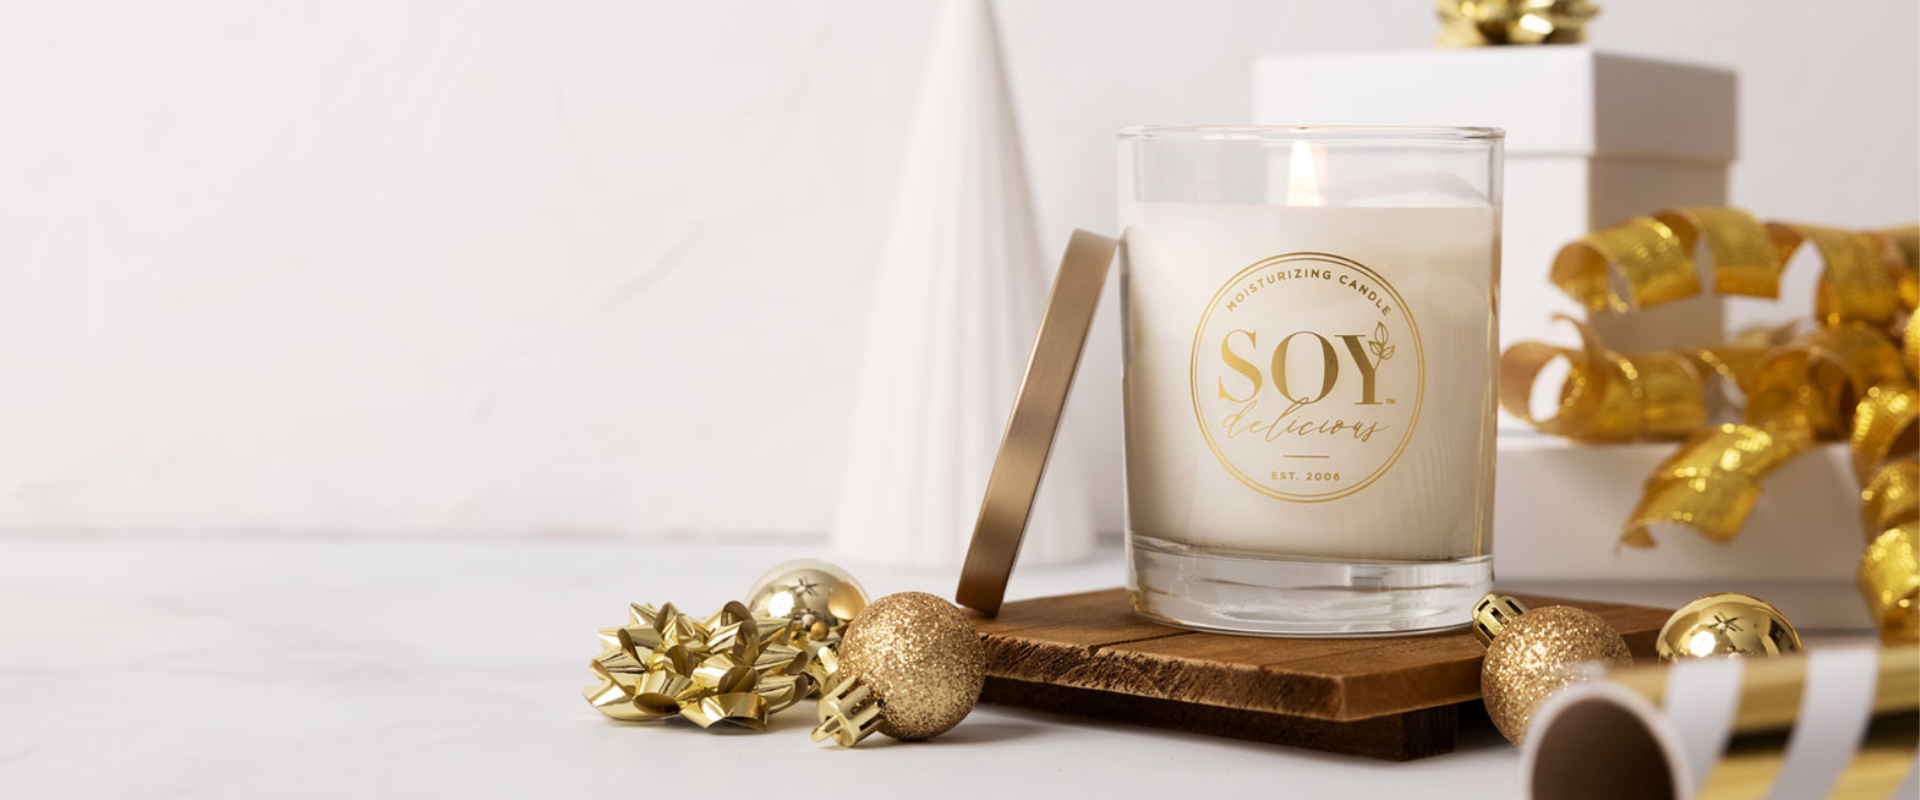 A Luxurious Holiday Gift Guide from Soy Delicious